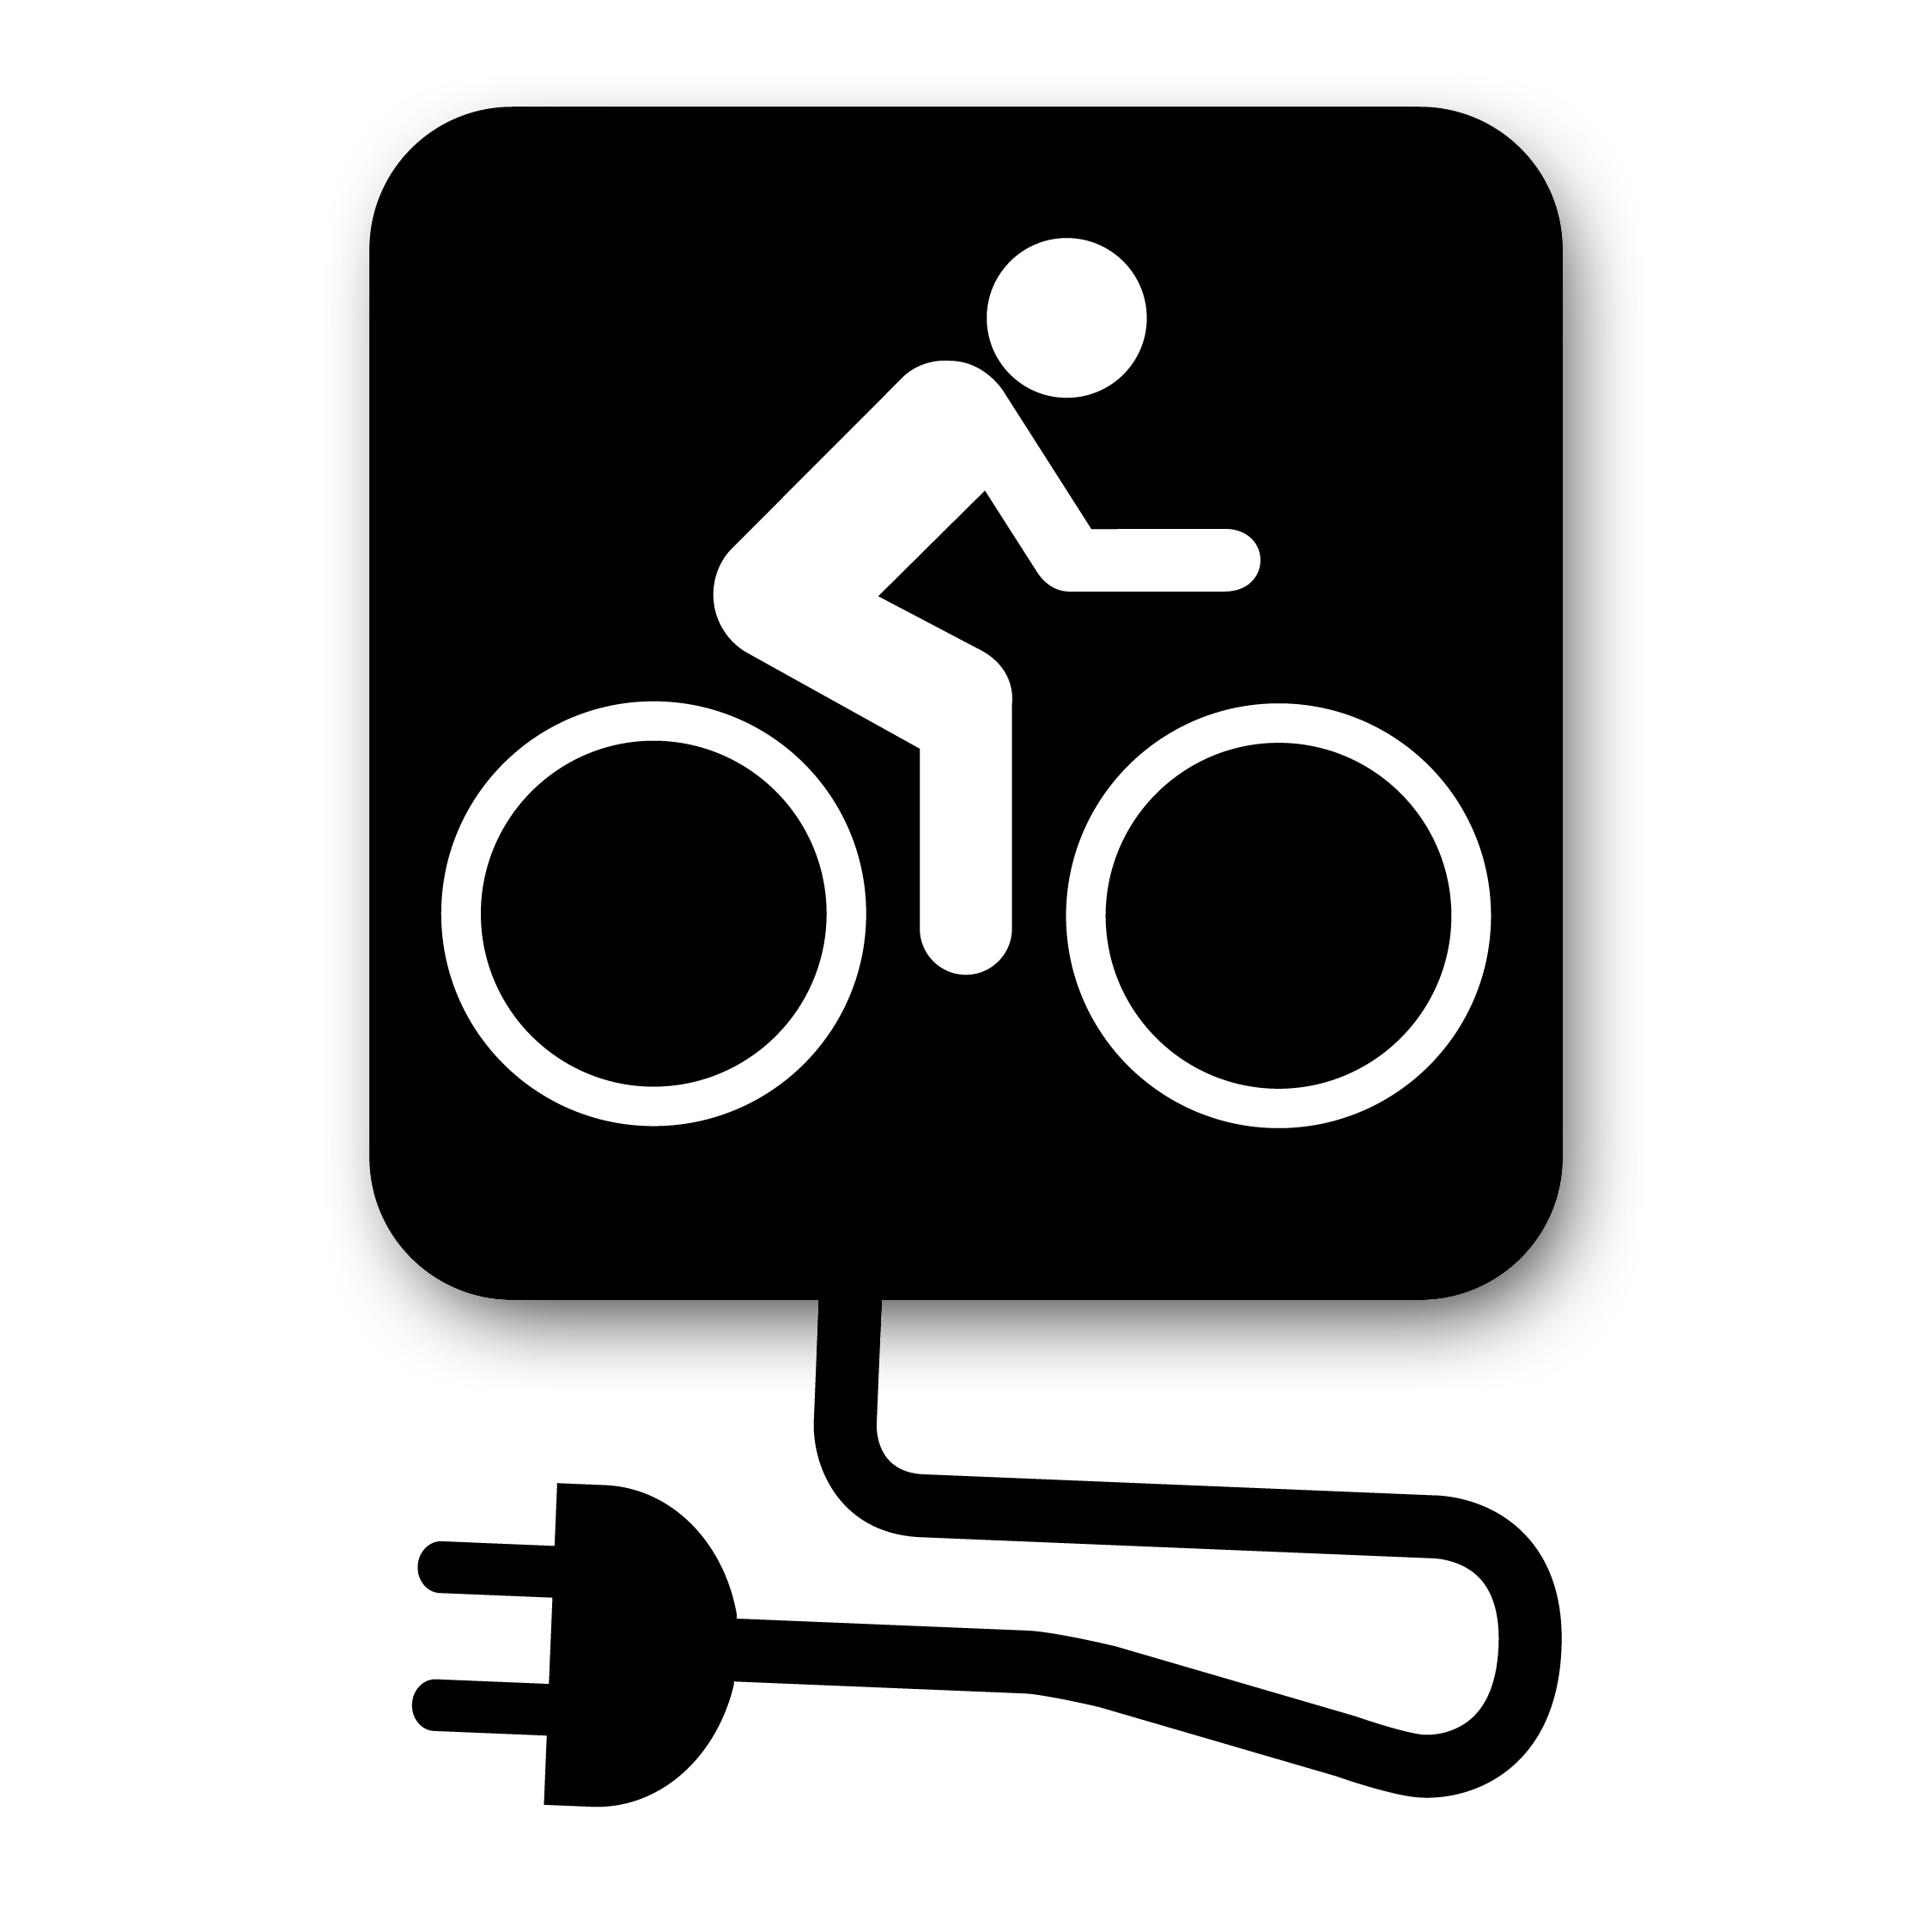 Pictograph logo for electric bicycle